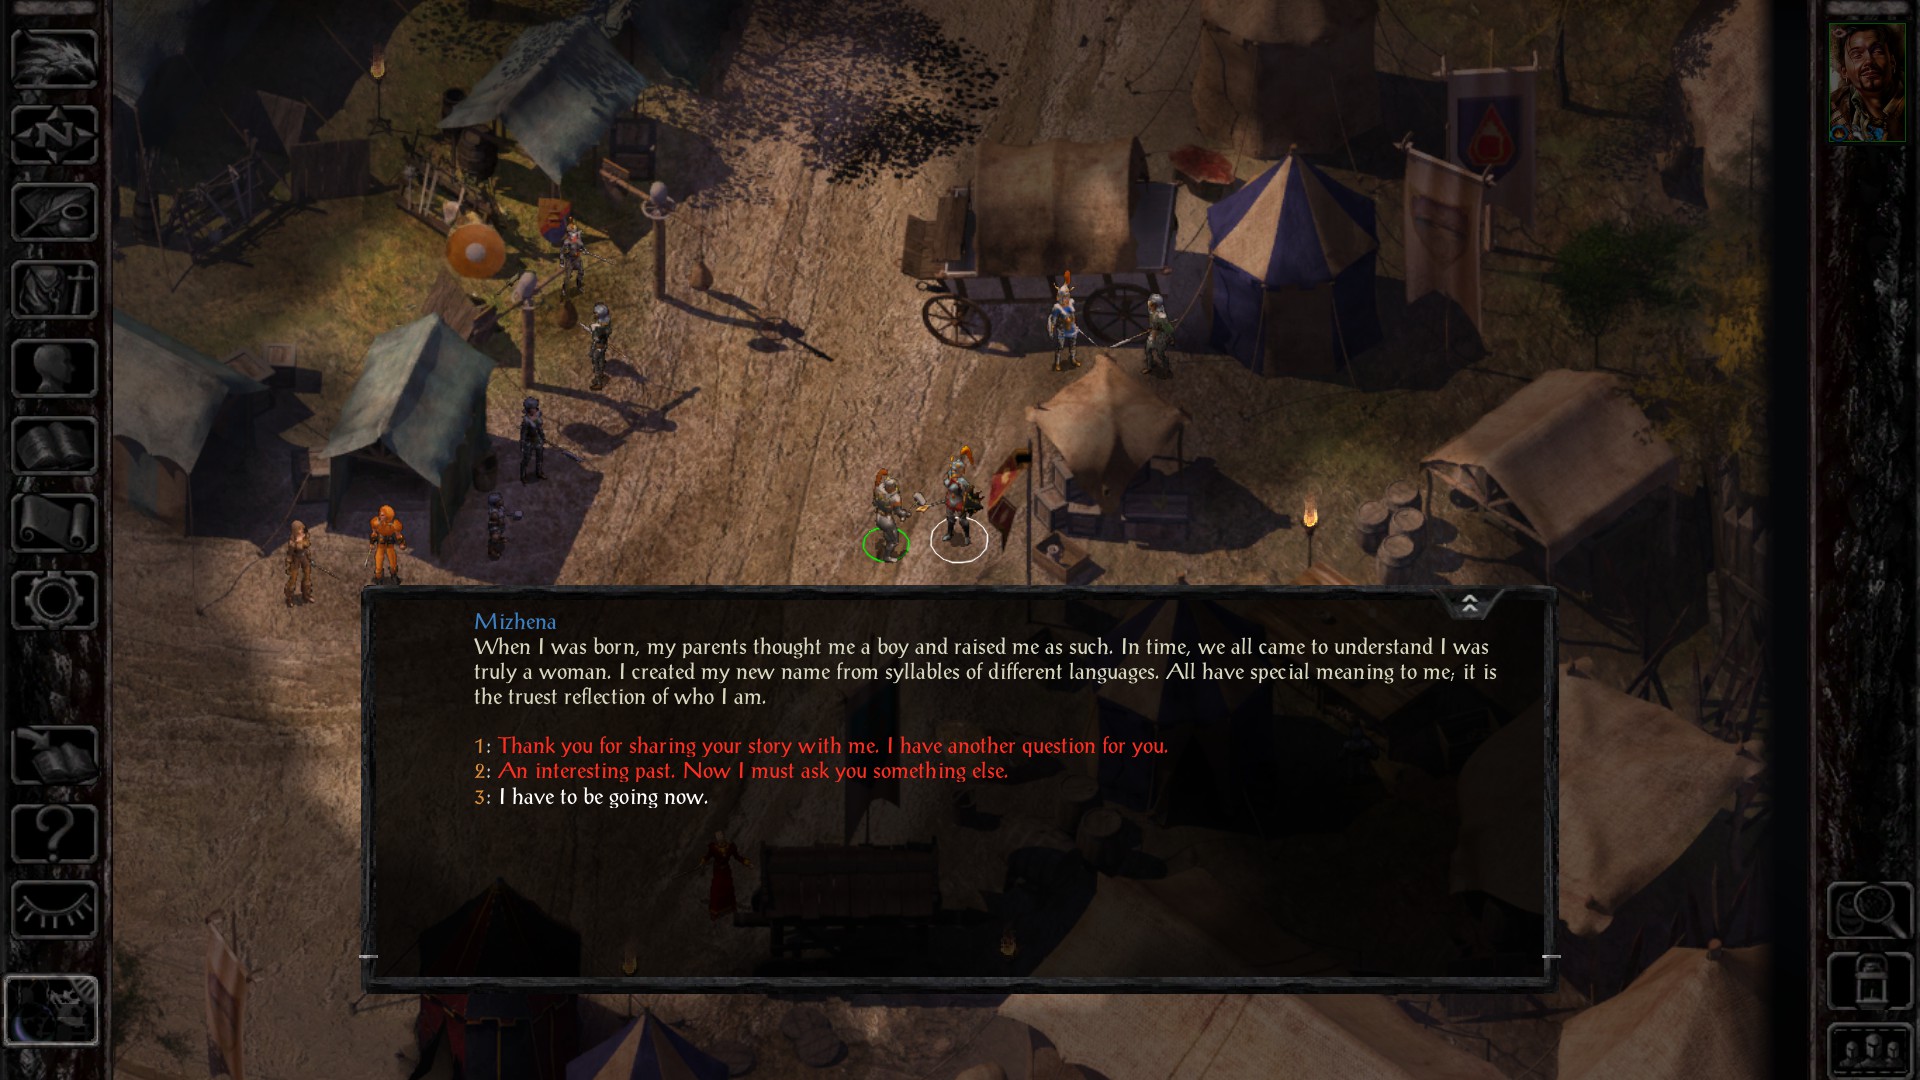 The ‘Social Justice’ Controversy Surrounding Baldur’s Gate’s New Expansion